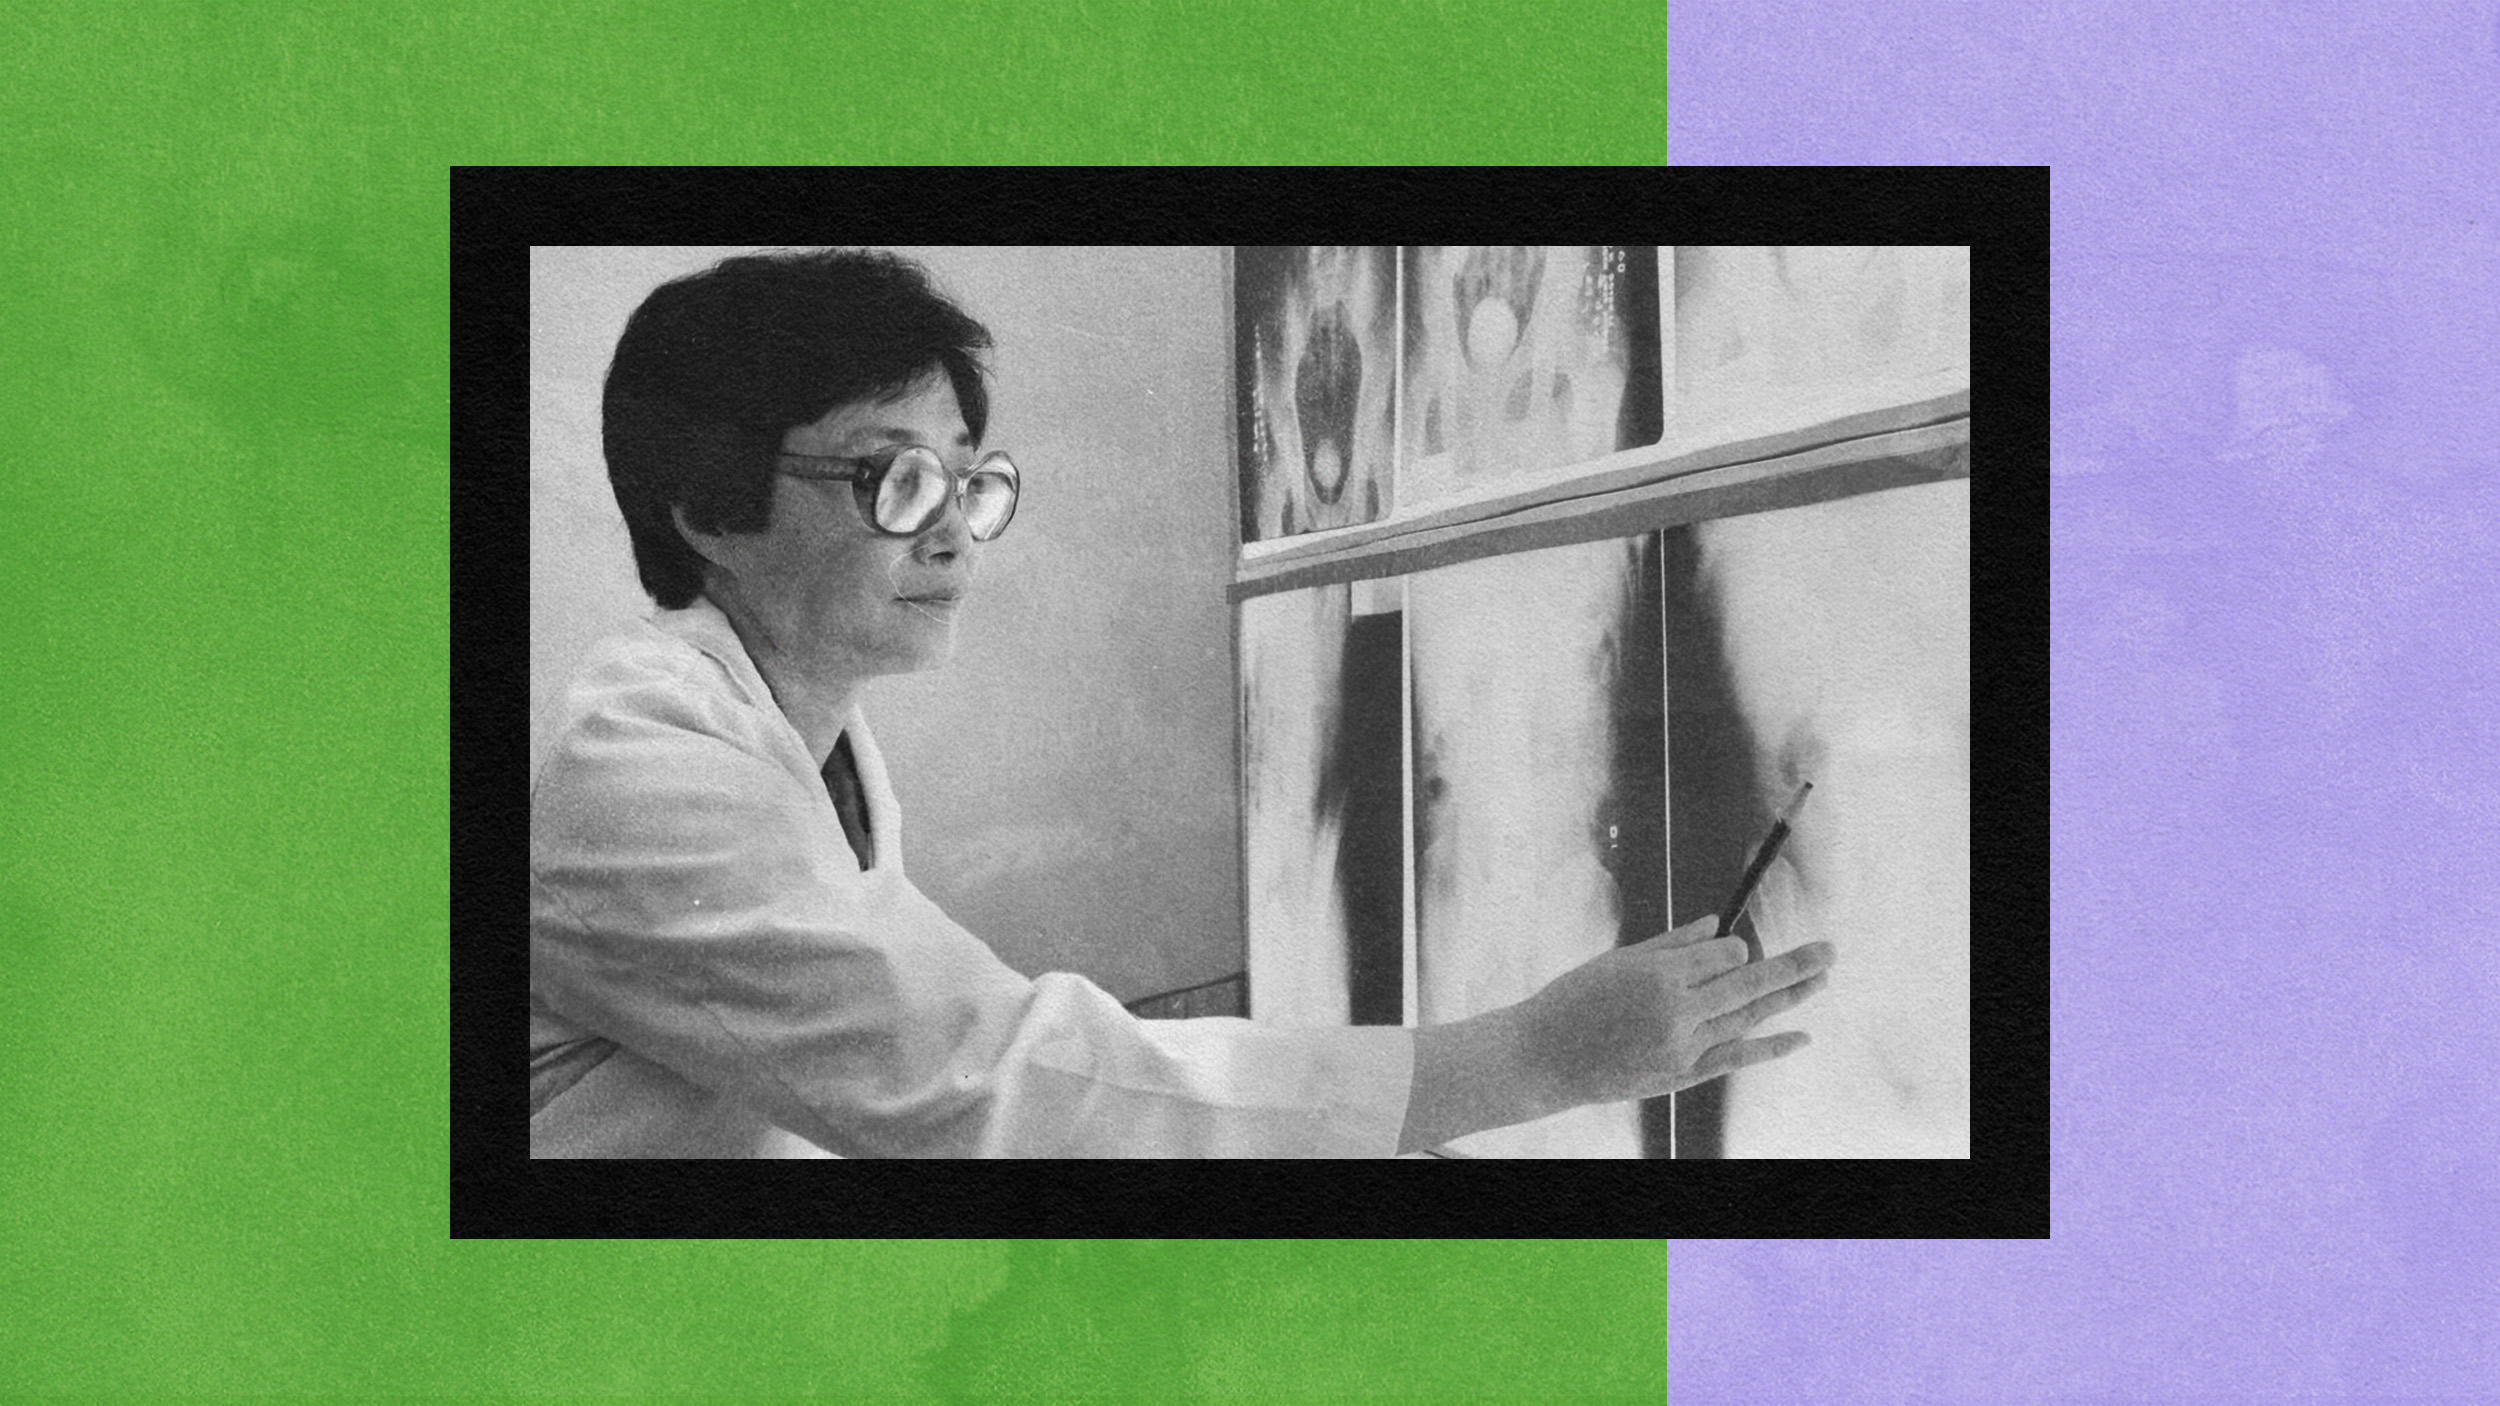 A female physician wearing a lab coat and glasses examines medical images on a lightboard. The background consists of a green and purple abstract design.